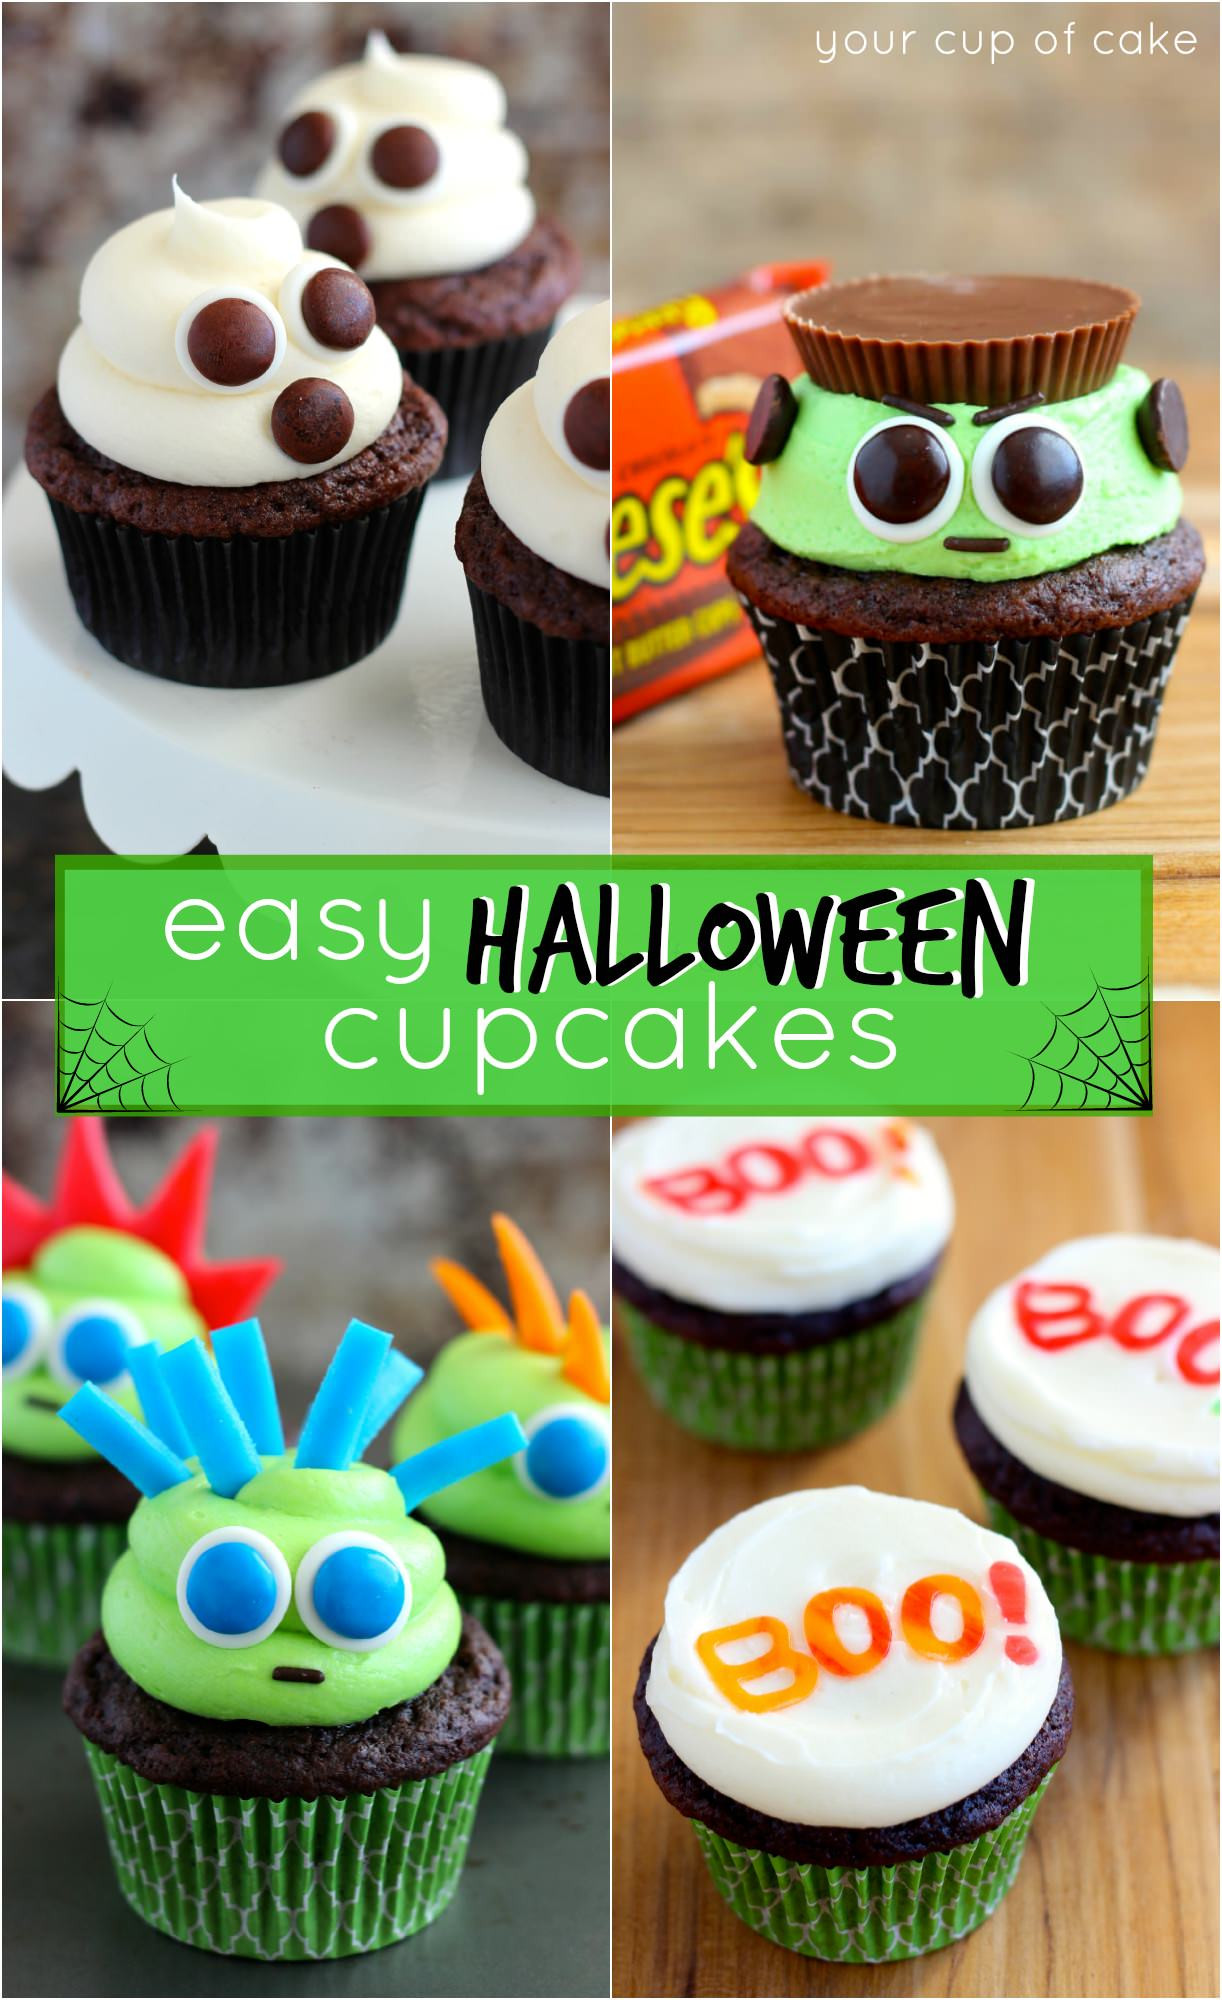 Halloween Cupcakes For Kids
 Easy Halloween Cupcake Ideas Your Cup of Cake